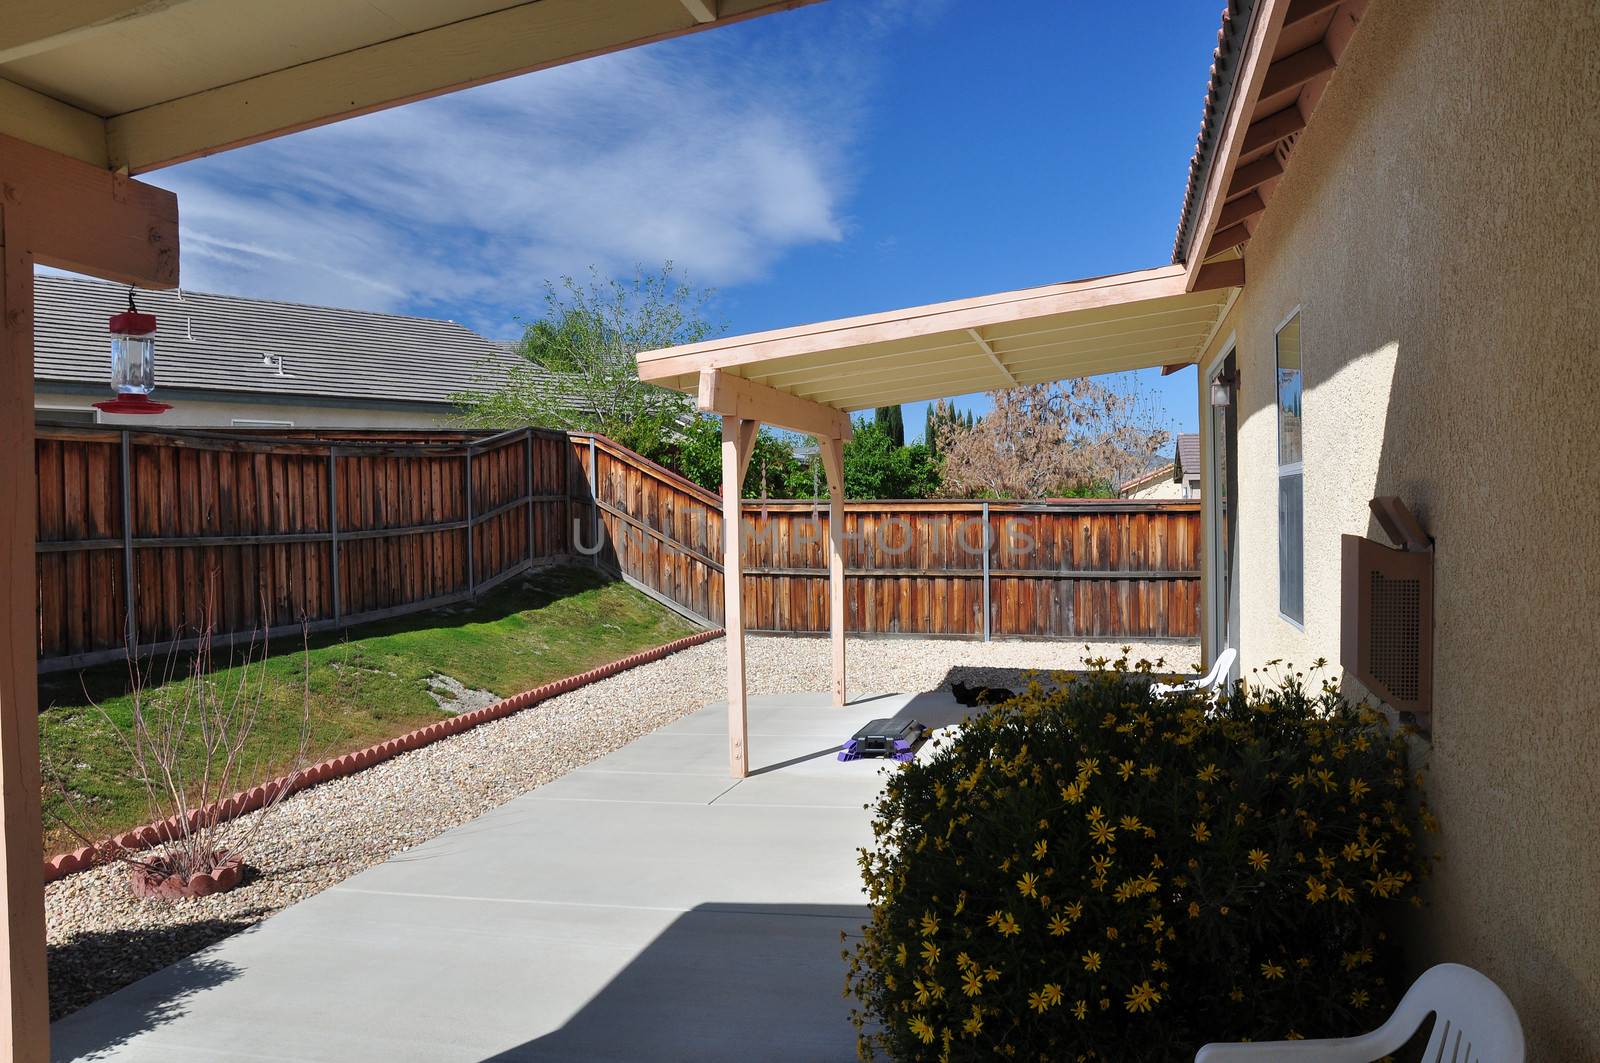 View of a backyard covered patio at a tract house in southern California.